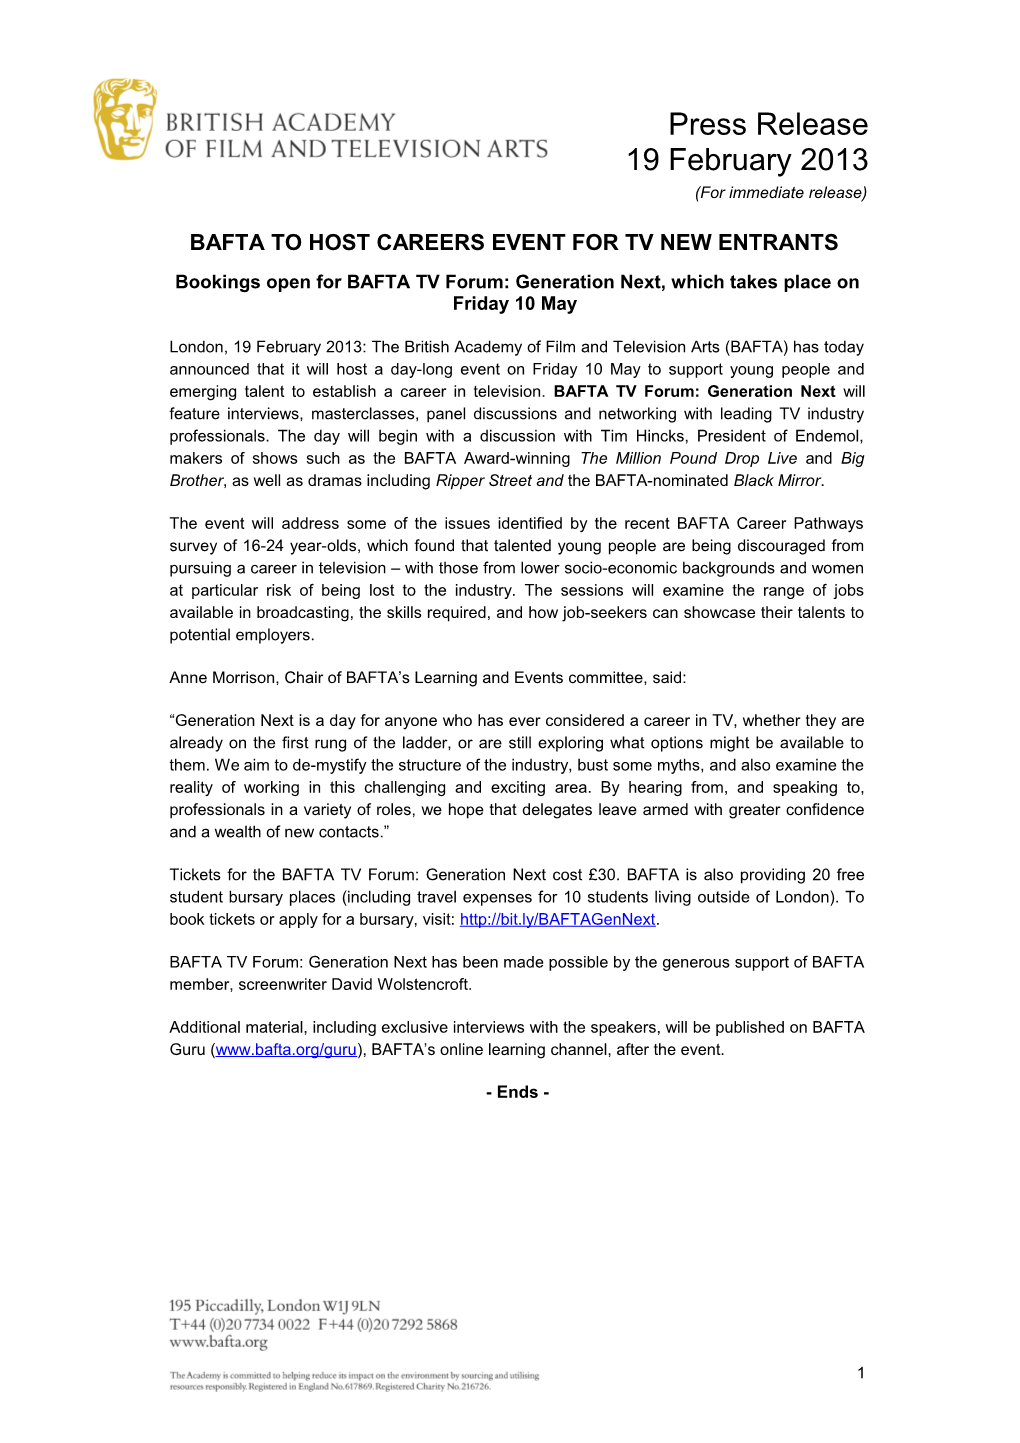 Bafta to Host Careers Event for Tv New Entrants